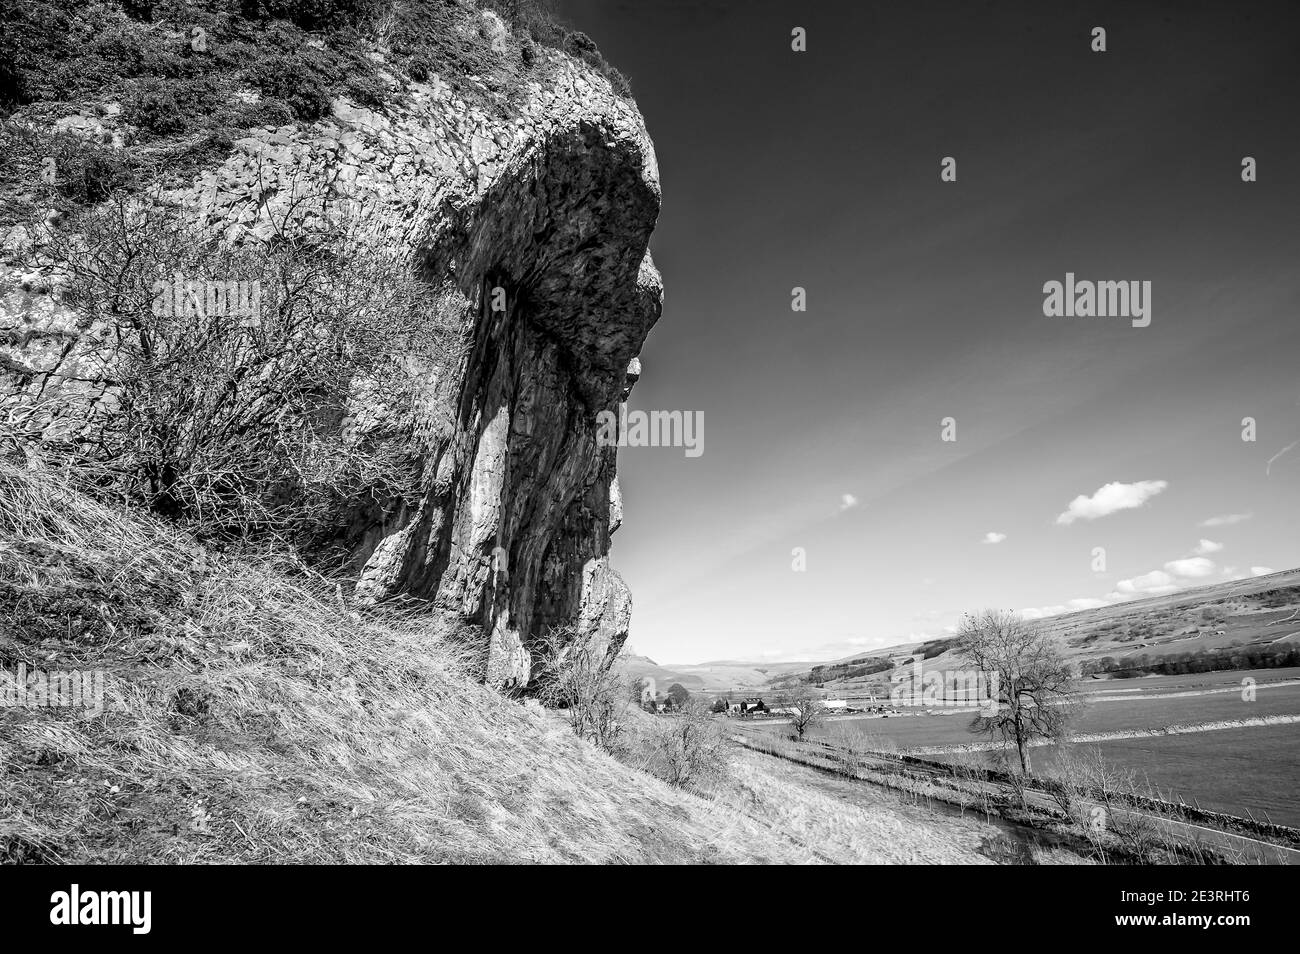 Fabulous spring scenery in monochrome of the overhanging limestone cliffs of Kilnsey Crag one of the famous geological features in the Yorkshire Dales near the villages of Kilnsey and Kettlewell Stock Photo